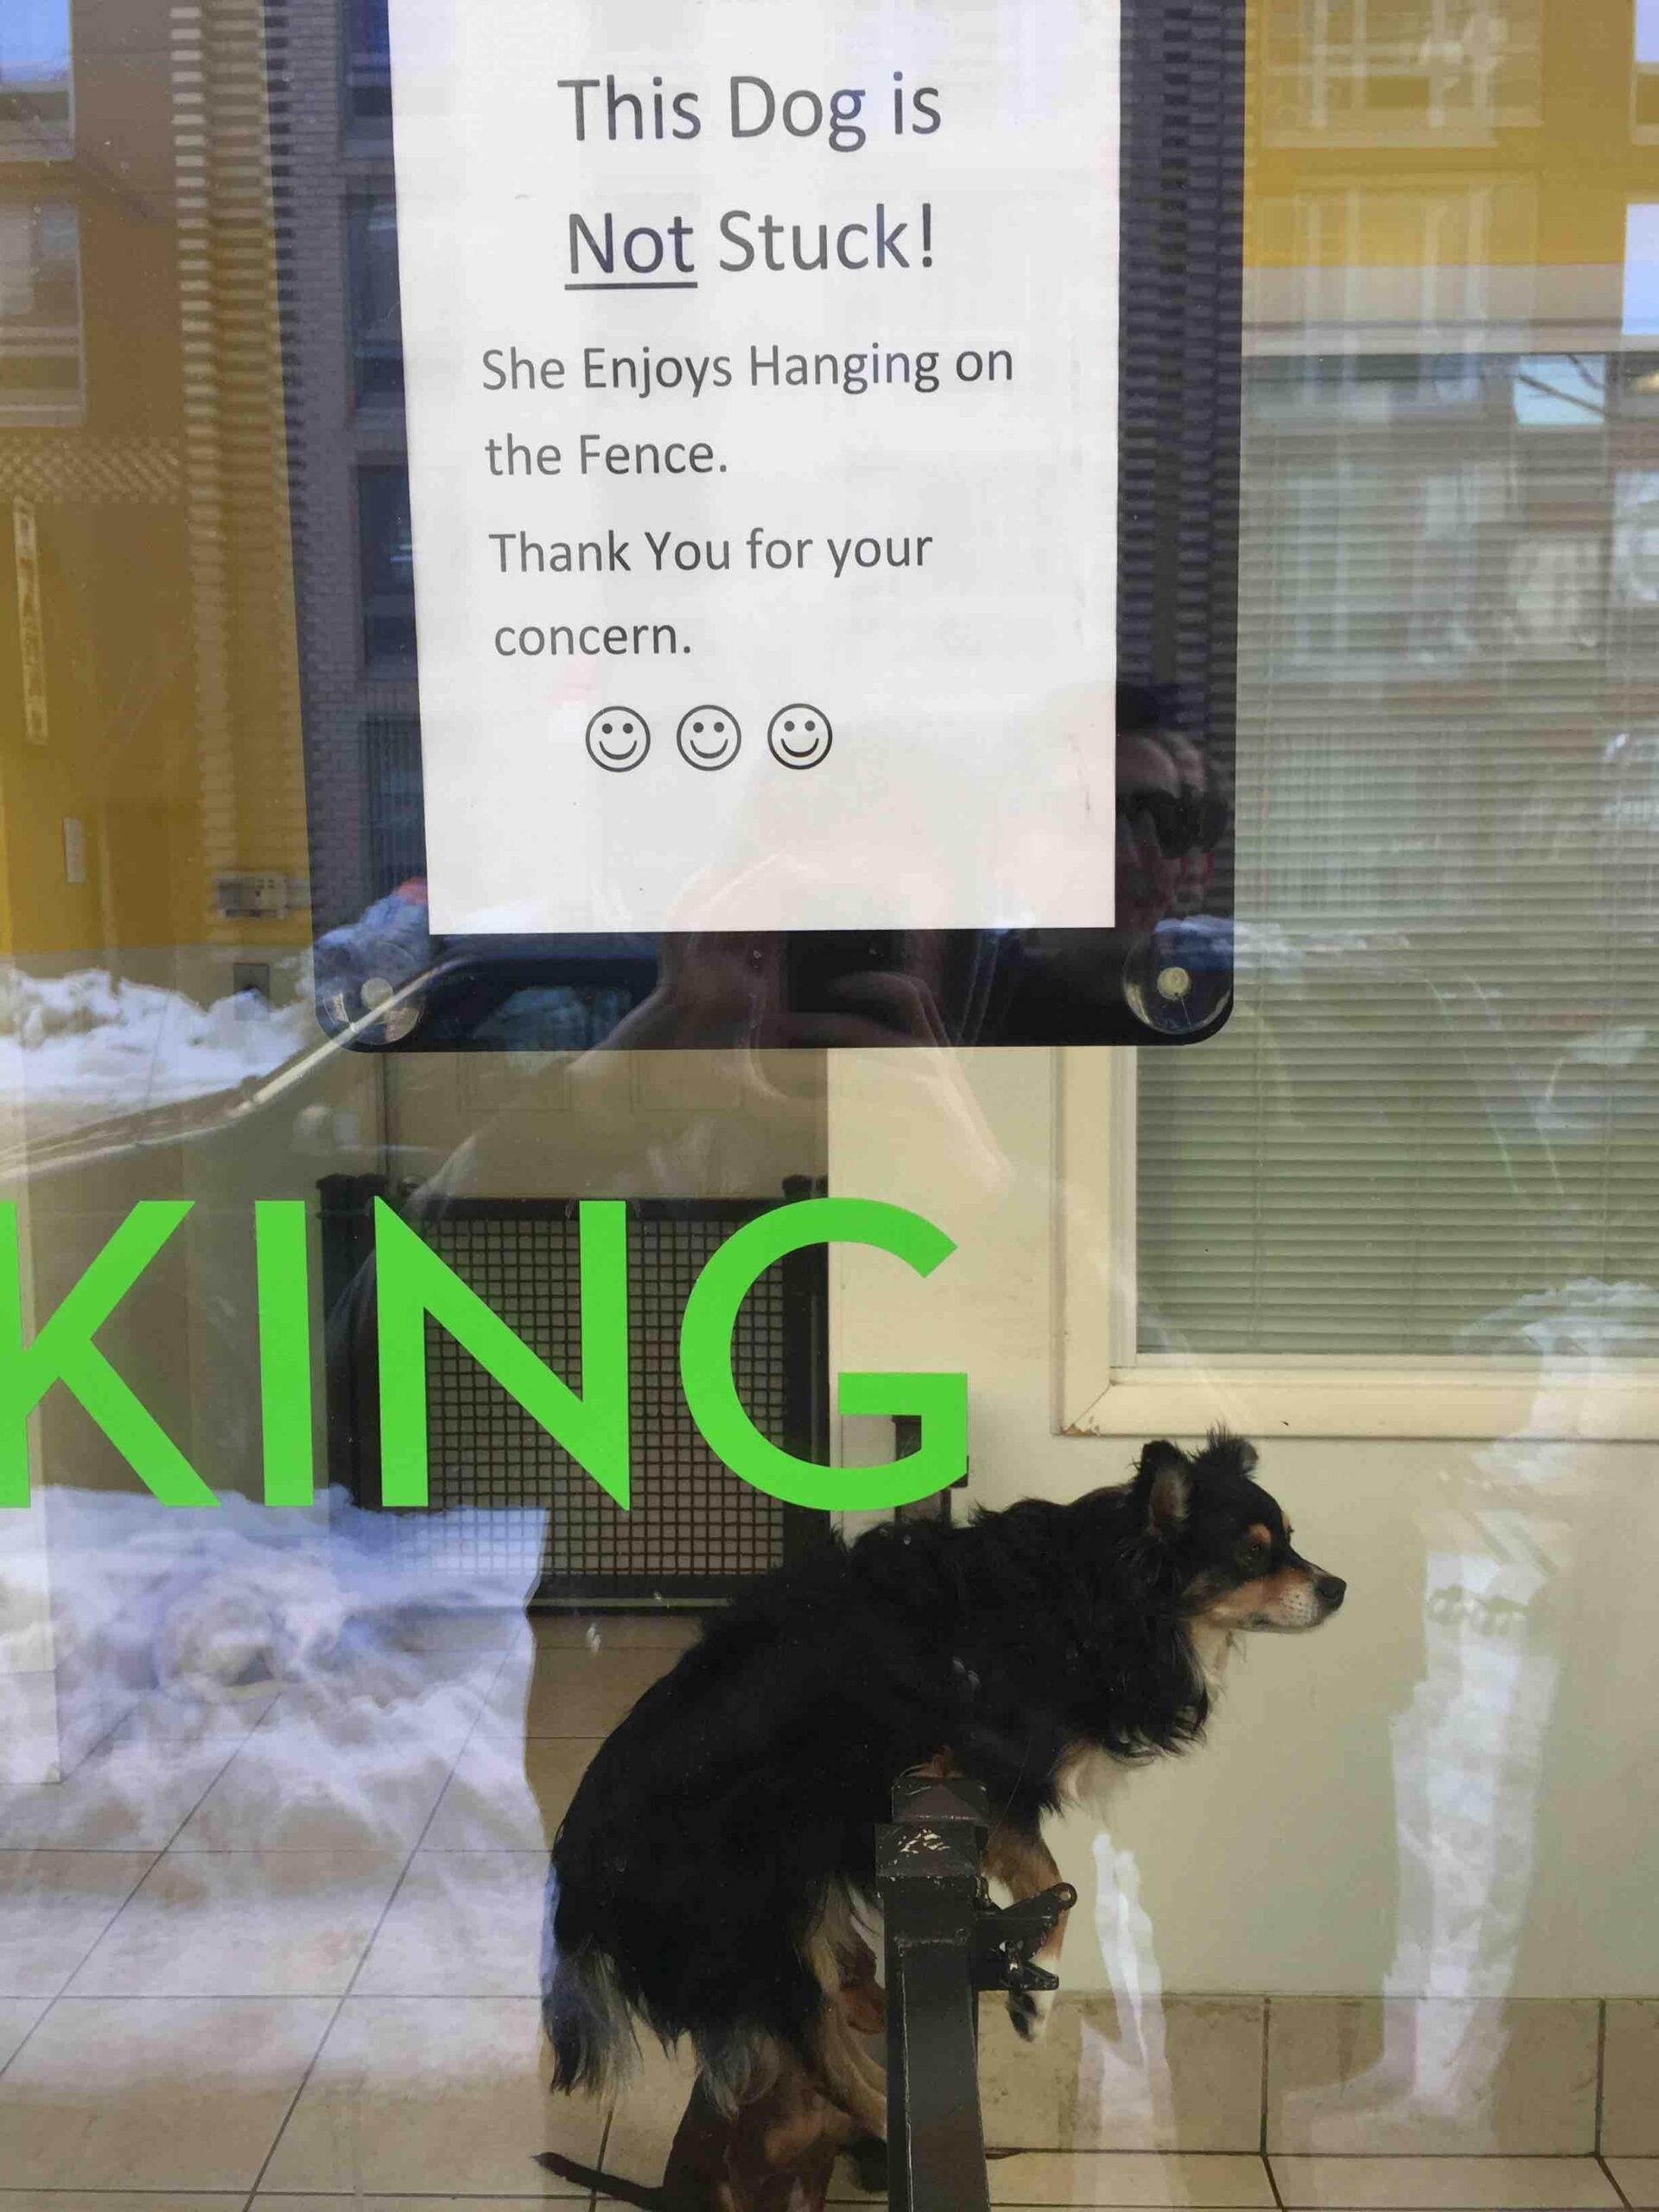 Photograph of a sign attached to a window that reads "This dog is not stuck! She enjoys hanging on the railing." Below the sign appears the dog in question, hanging on the railing.